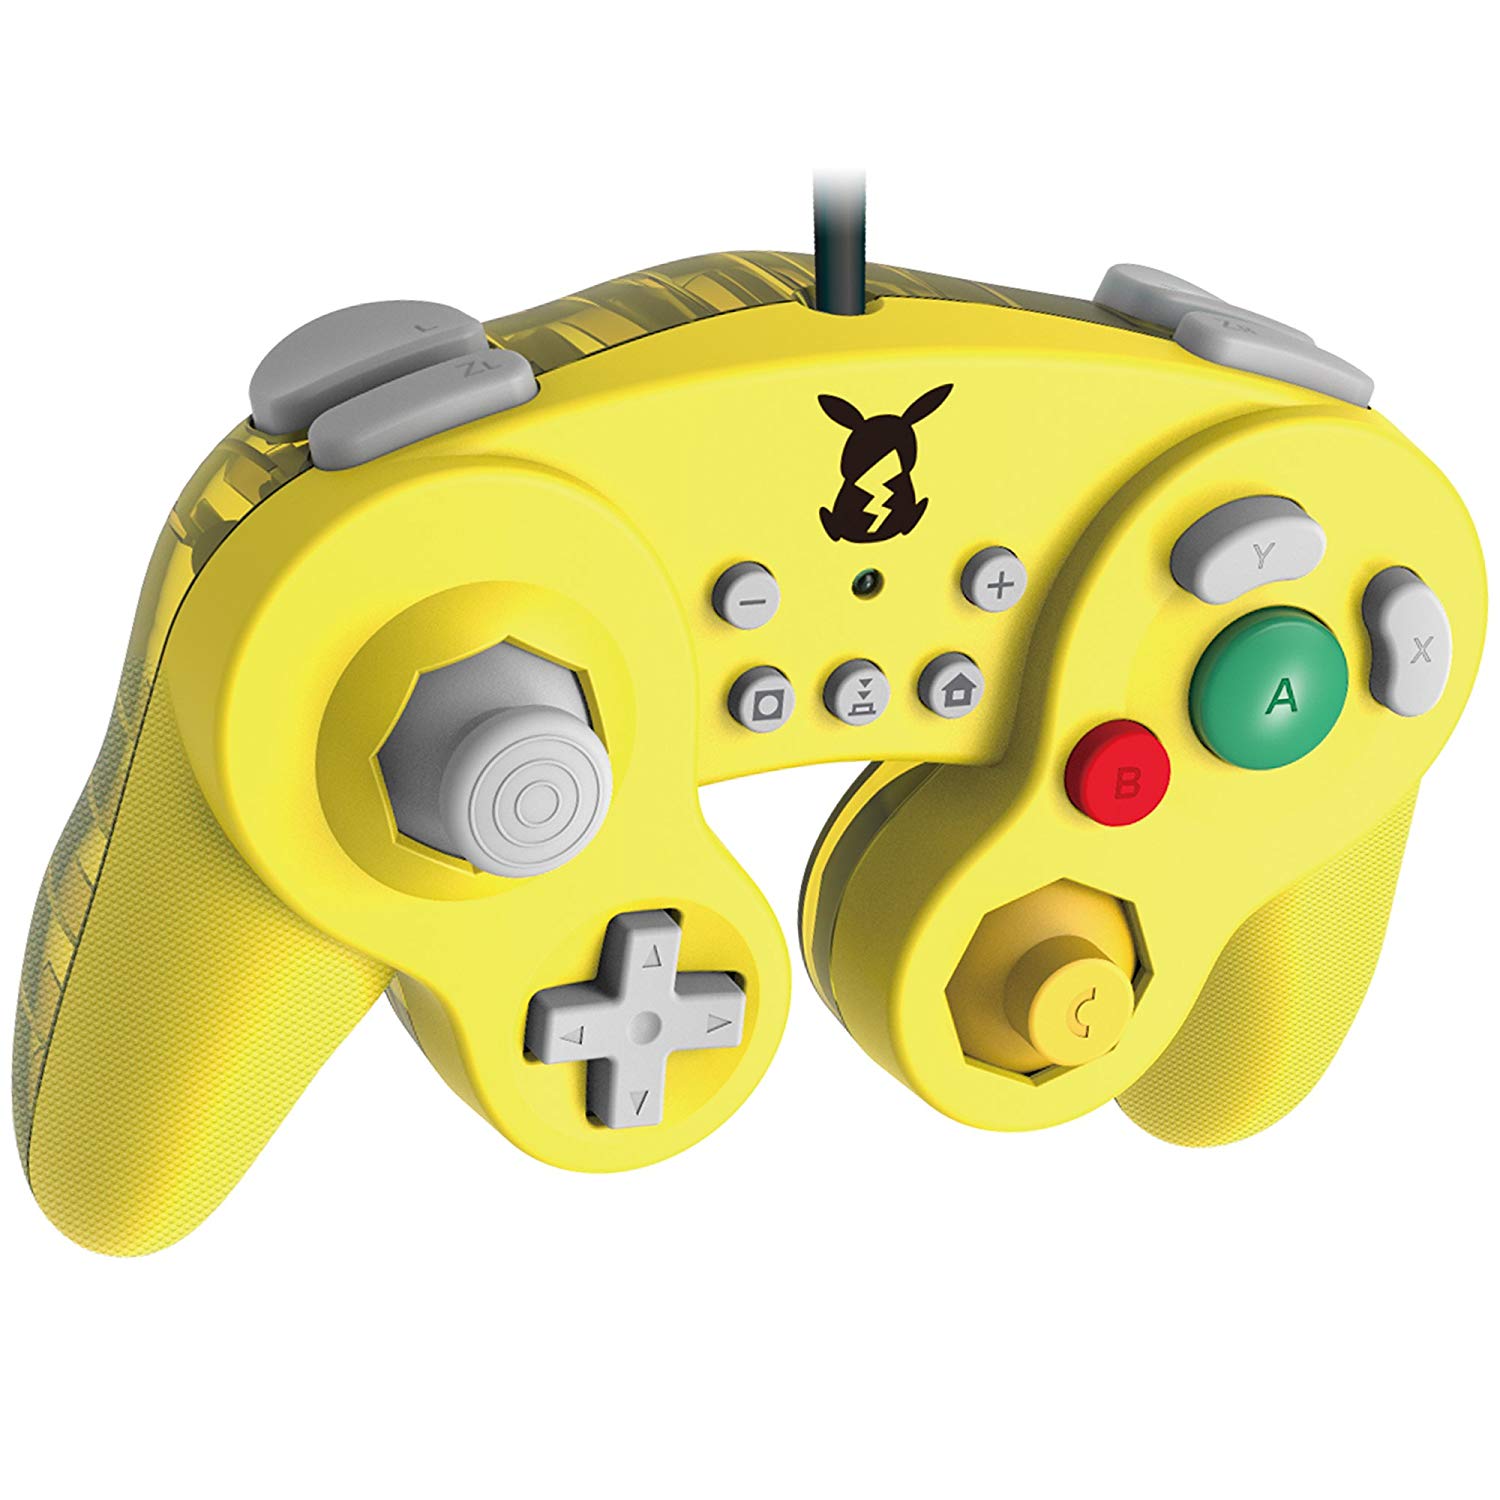 HORI Reveals – Controllers GameCube And For Zelda, Switch Pikachu NintendoSoup Mario